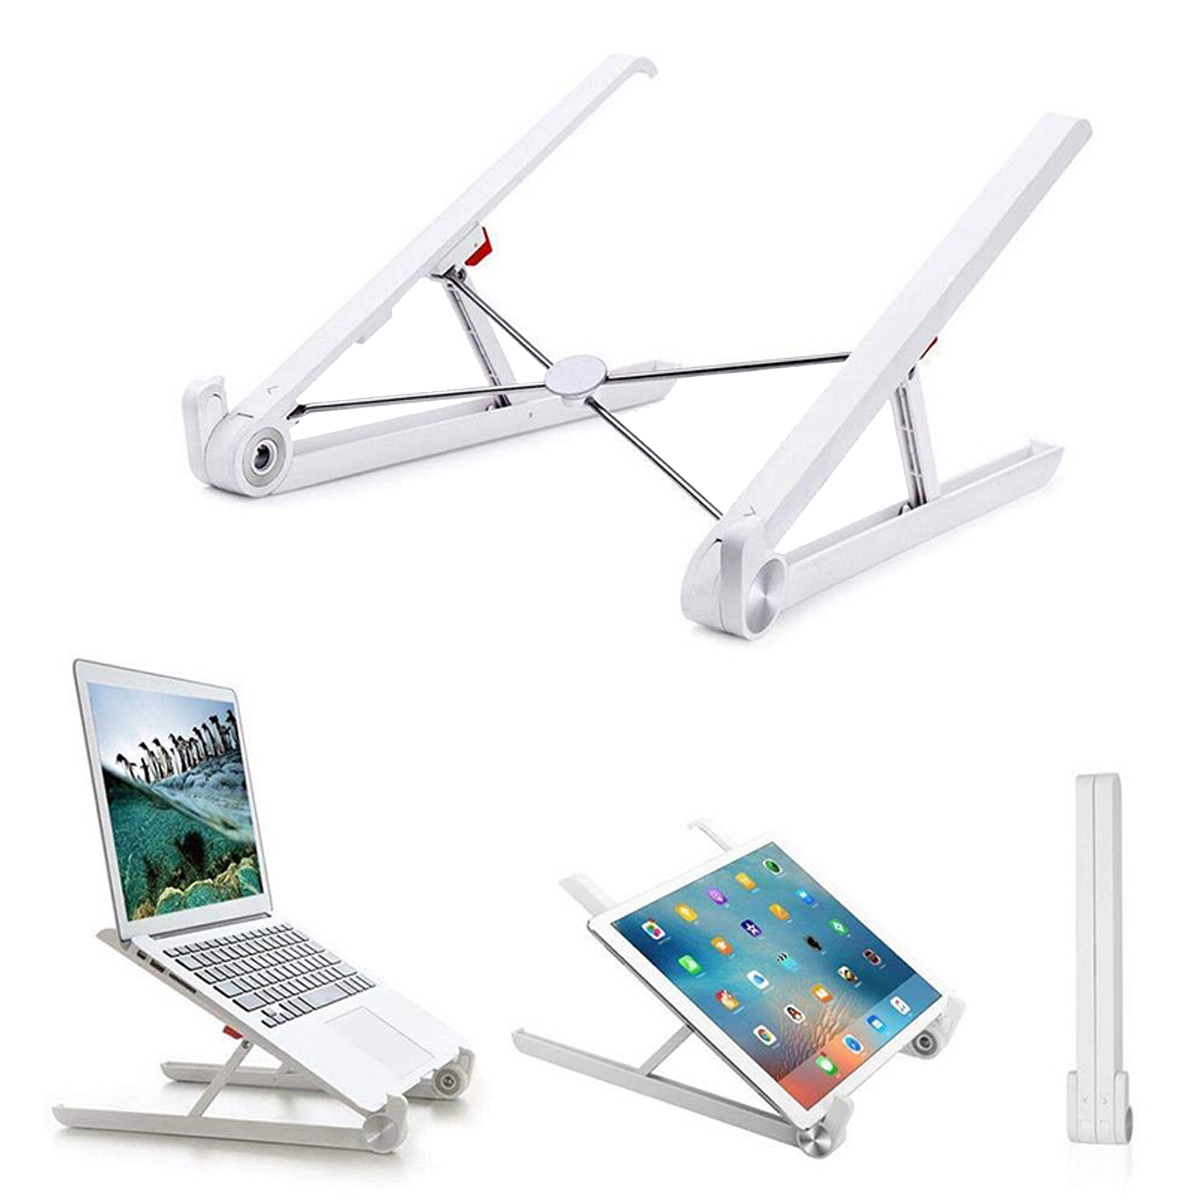 Portable-Desktop-Foldable-Height-Adjustable-Notebook-Stand-Heat-Dissipation-For-Notebook-MacBook-110-1681886-7